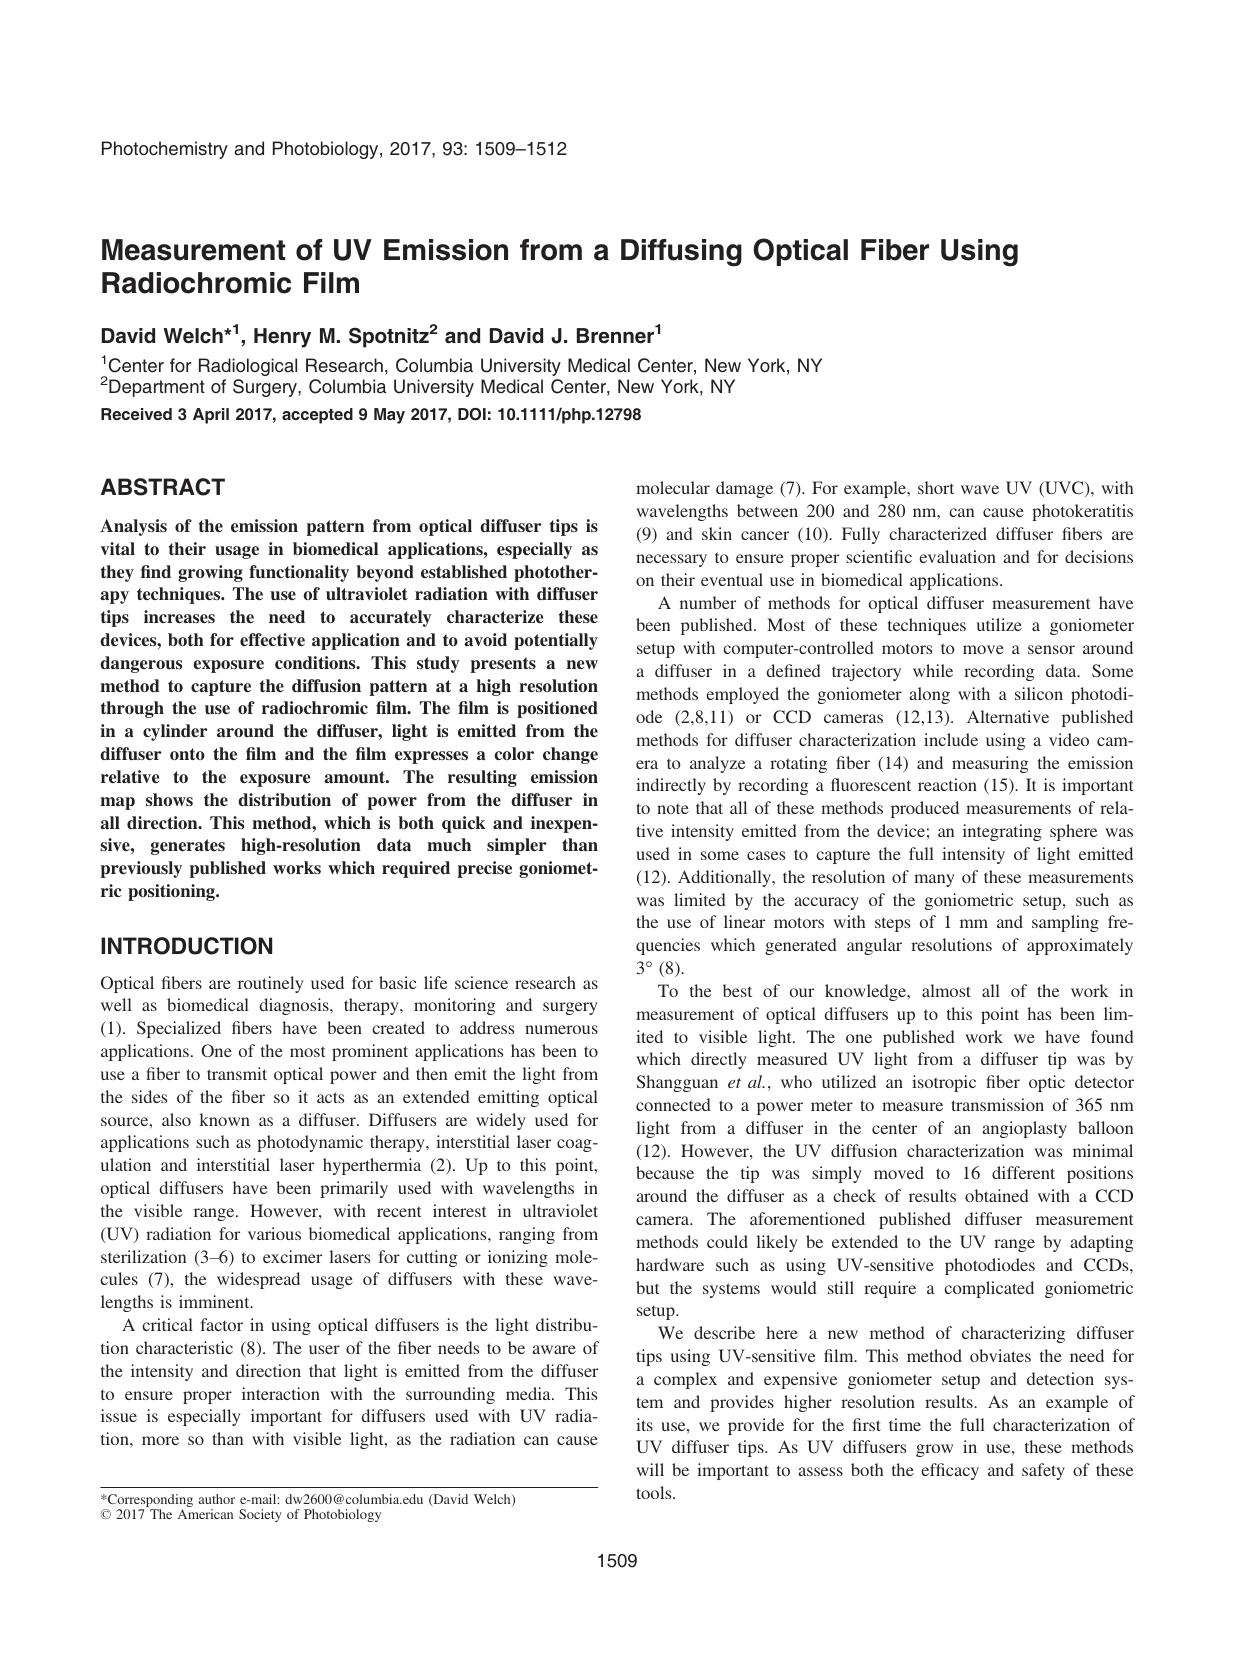 Measurement of UV Emission from a Diffusing Optical Fiber Using Radiochromic Film by Unknown